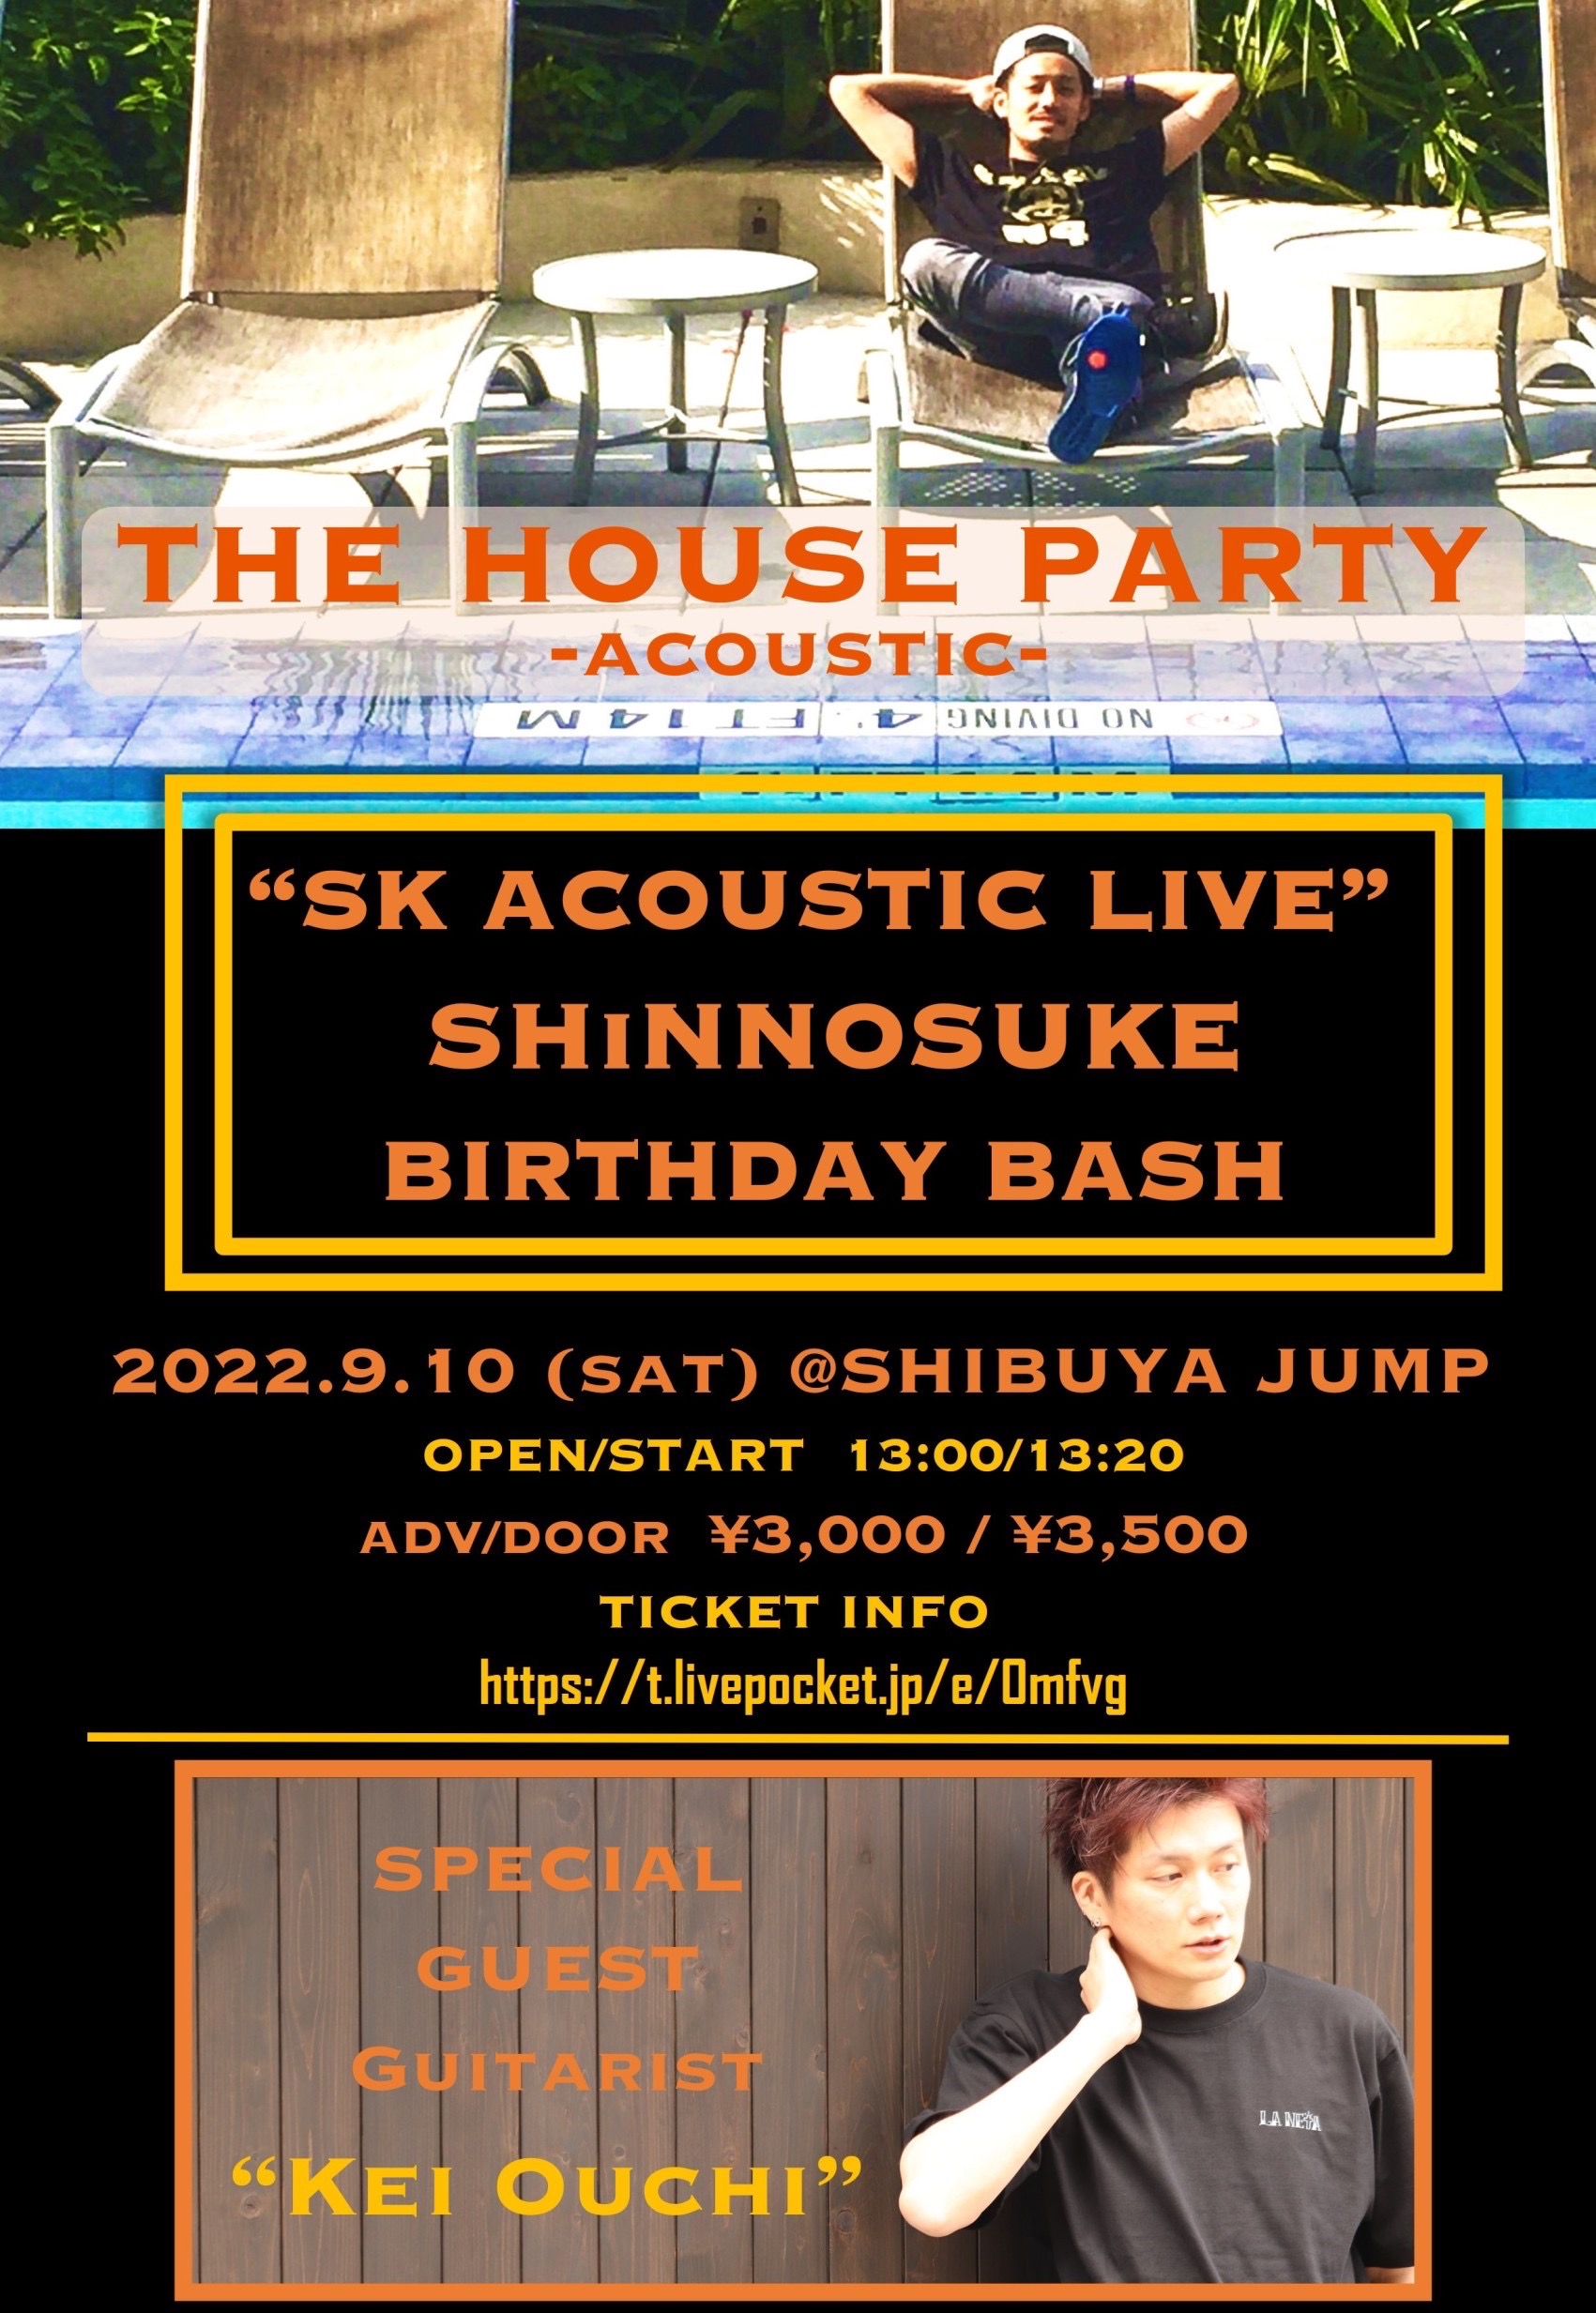 THE HOUSE PARTY -ACOUSTICK- "SK ACOUSTIC LIVE" SHINNOSUKE BIRTHDAY BASH